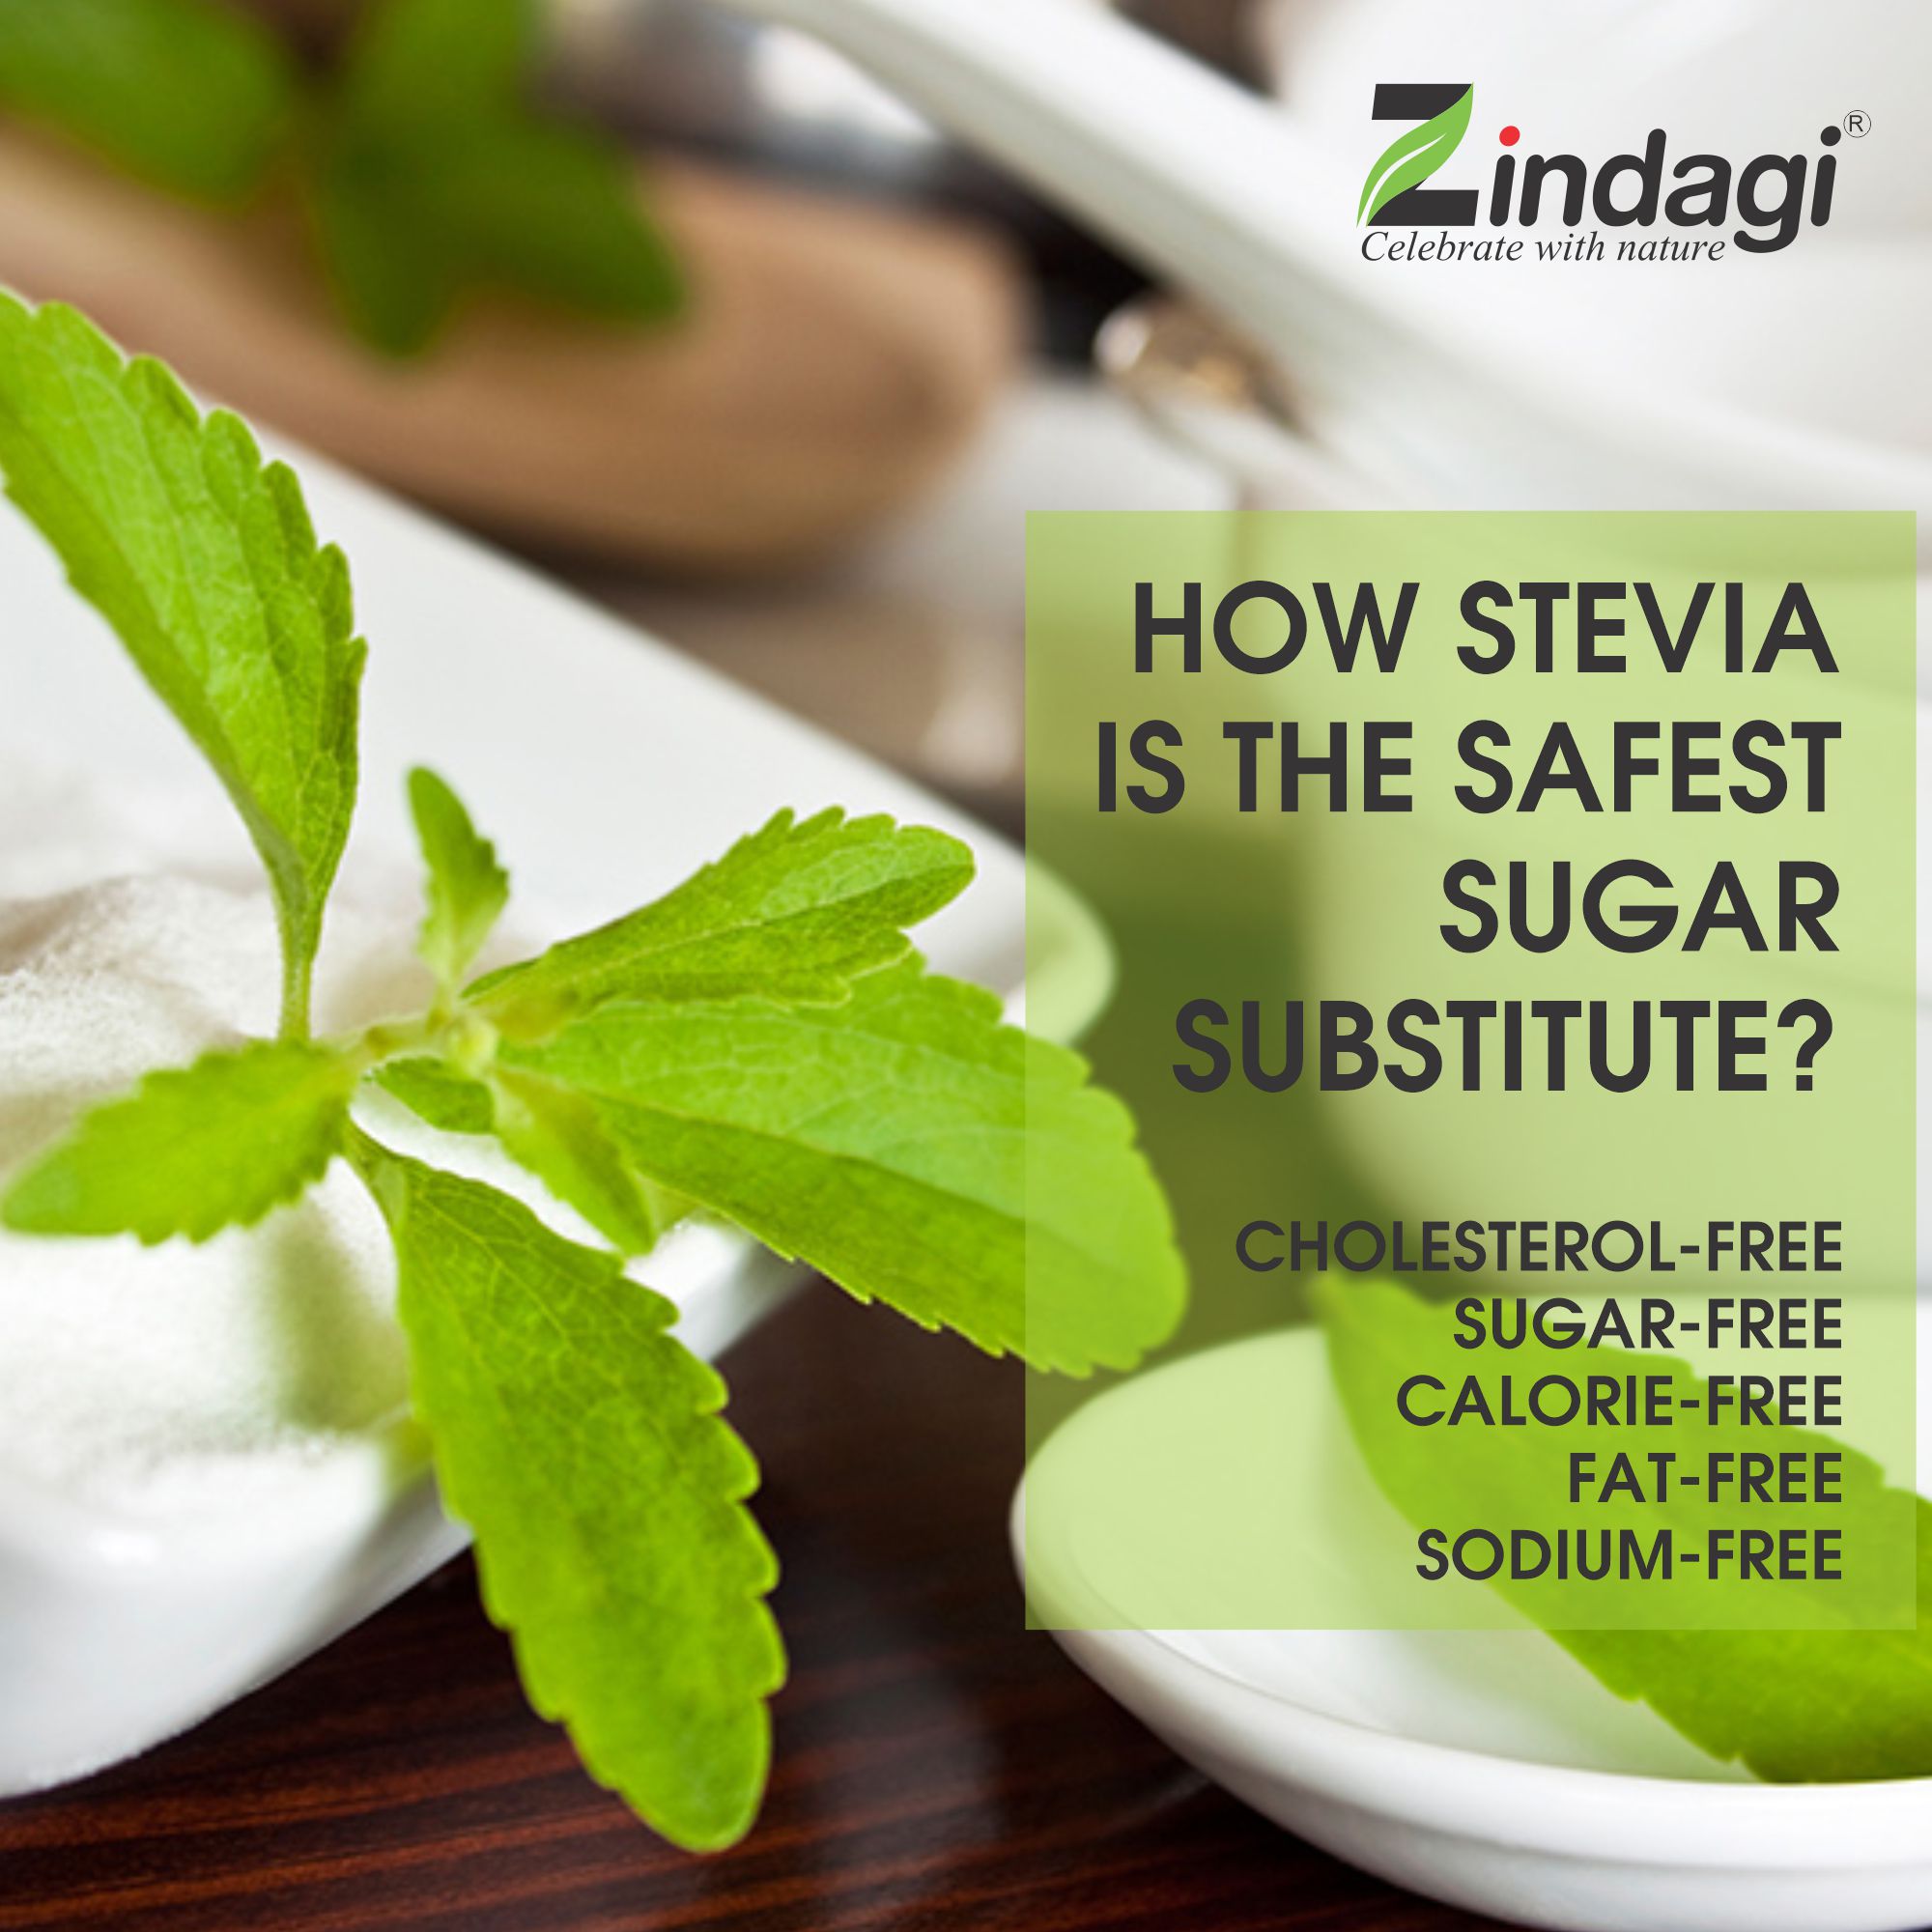 How Stevia is the Safest Sugar Substitute? Zindagi Celebrate With